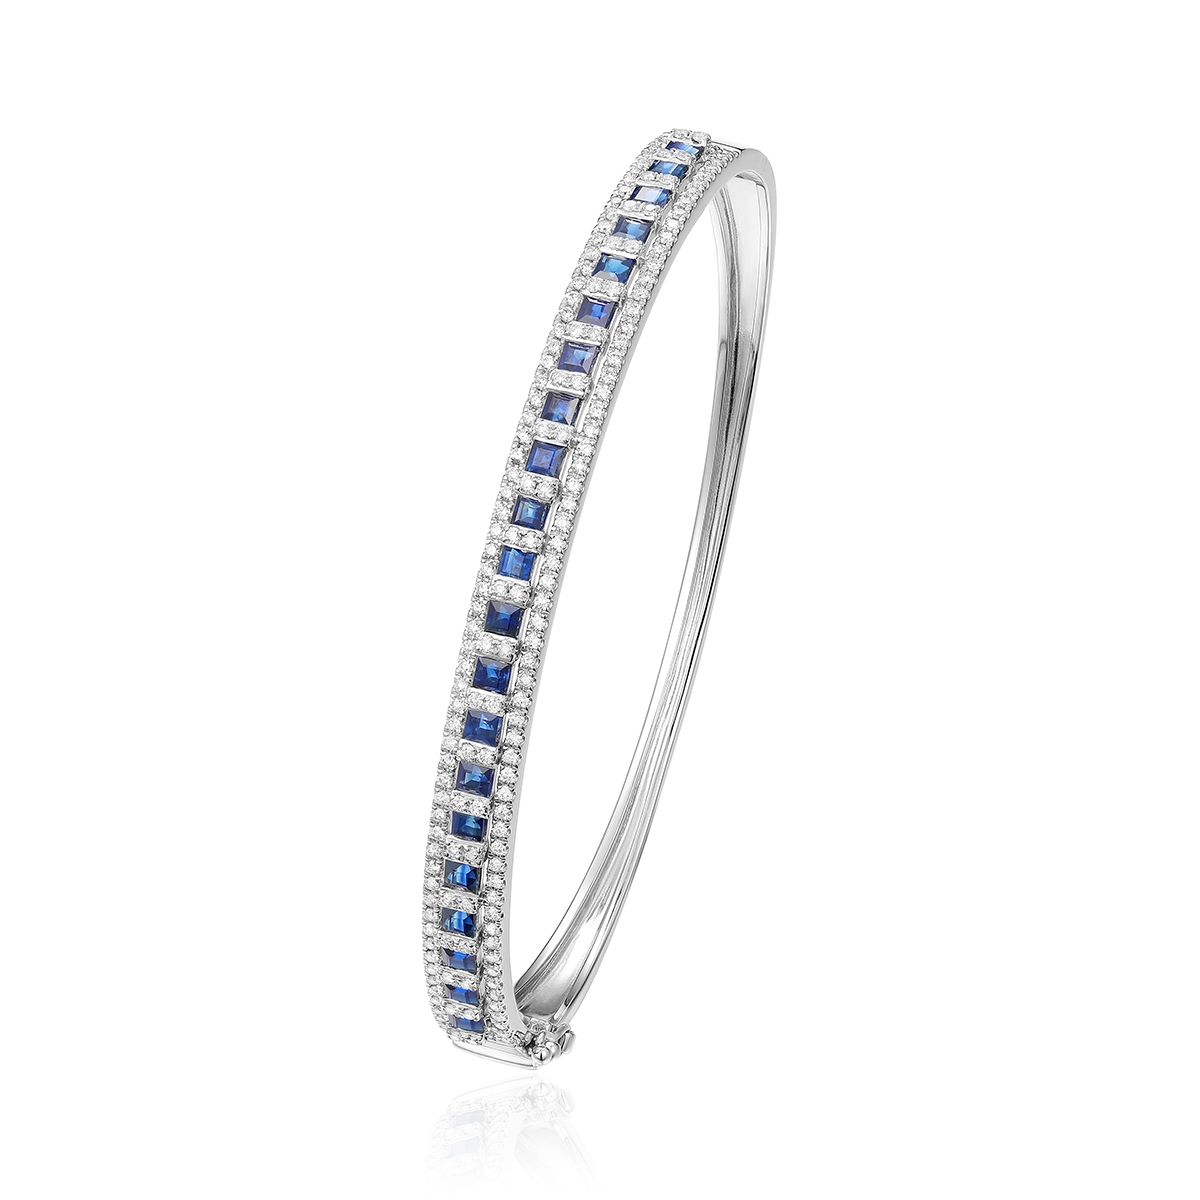 Locking Cage Bracelet | White Gold with Ombre Blue Sapphires on Latera -  Rachel Katz Jewelry